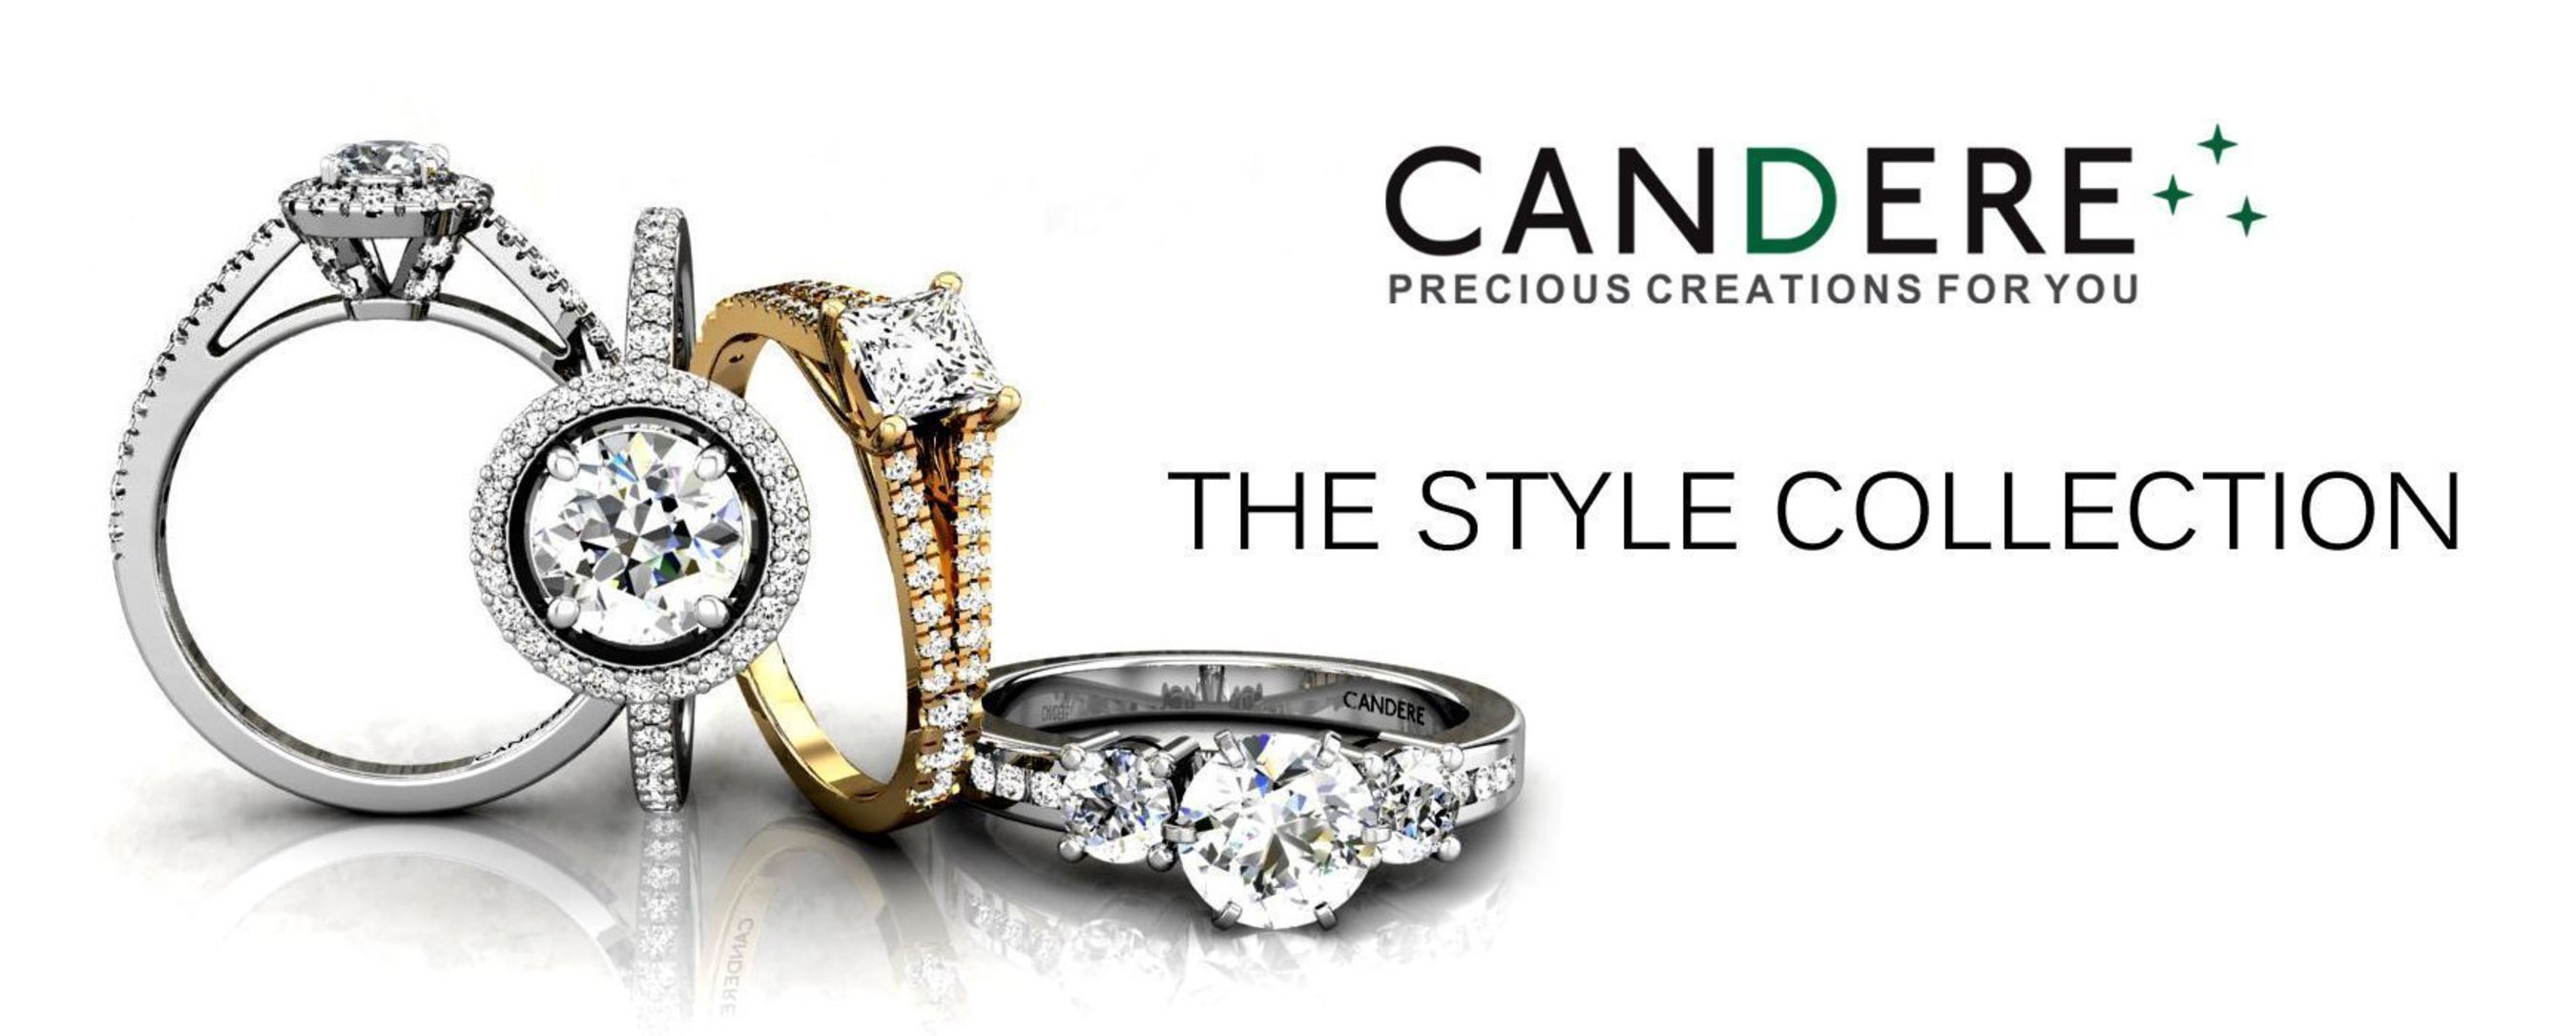 candere launches 'the style collection' - an elegant range of diamond jewellery